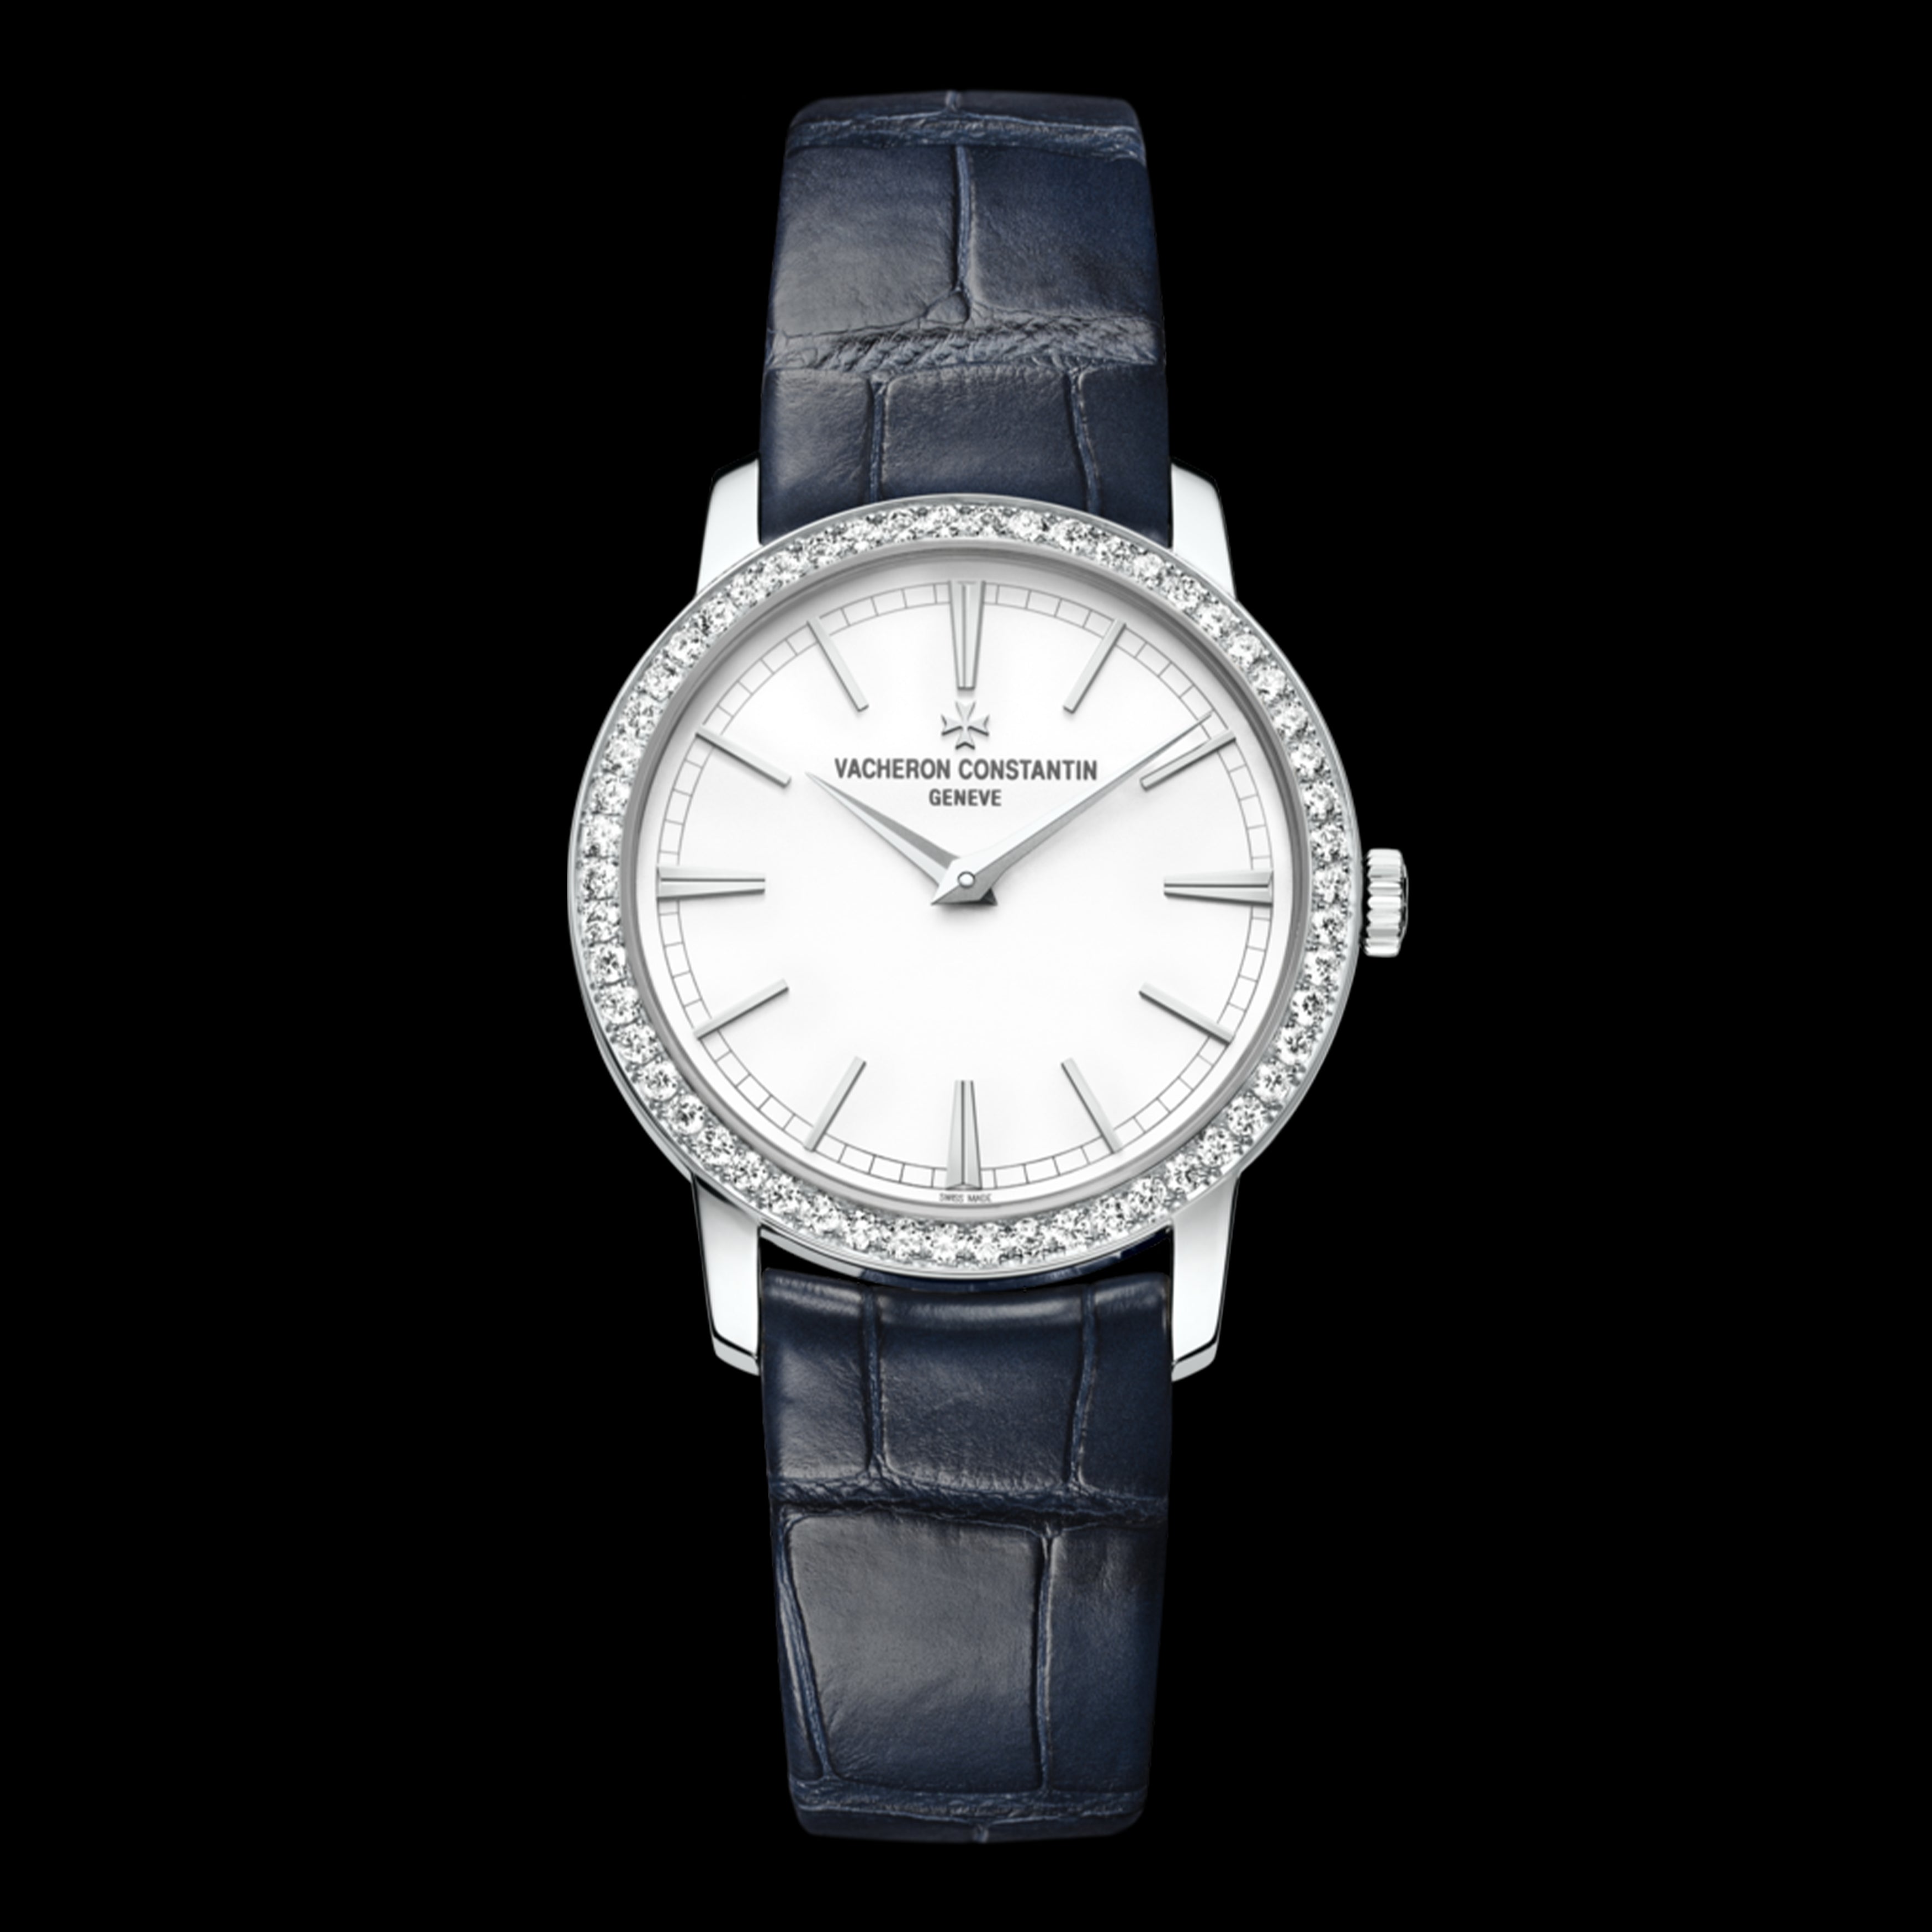 Vacheron Constantin Traditionnelle Manual-Winding Watch, 33mm White Dial, 81590/000G-9848